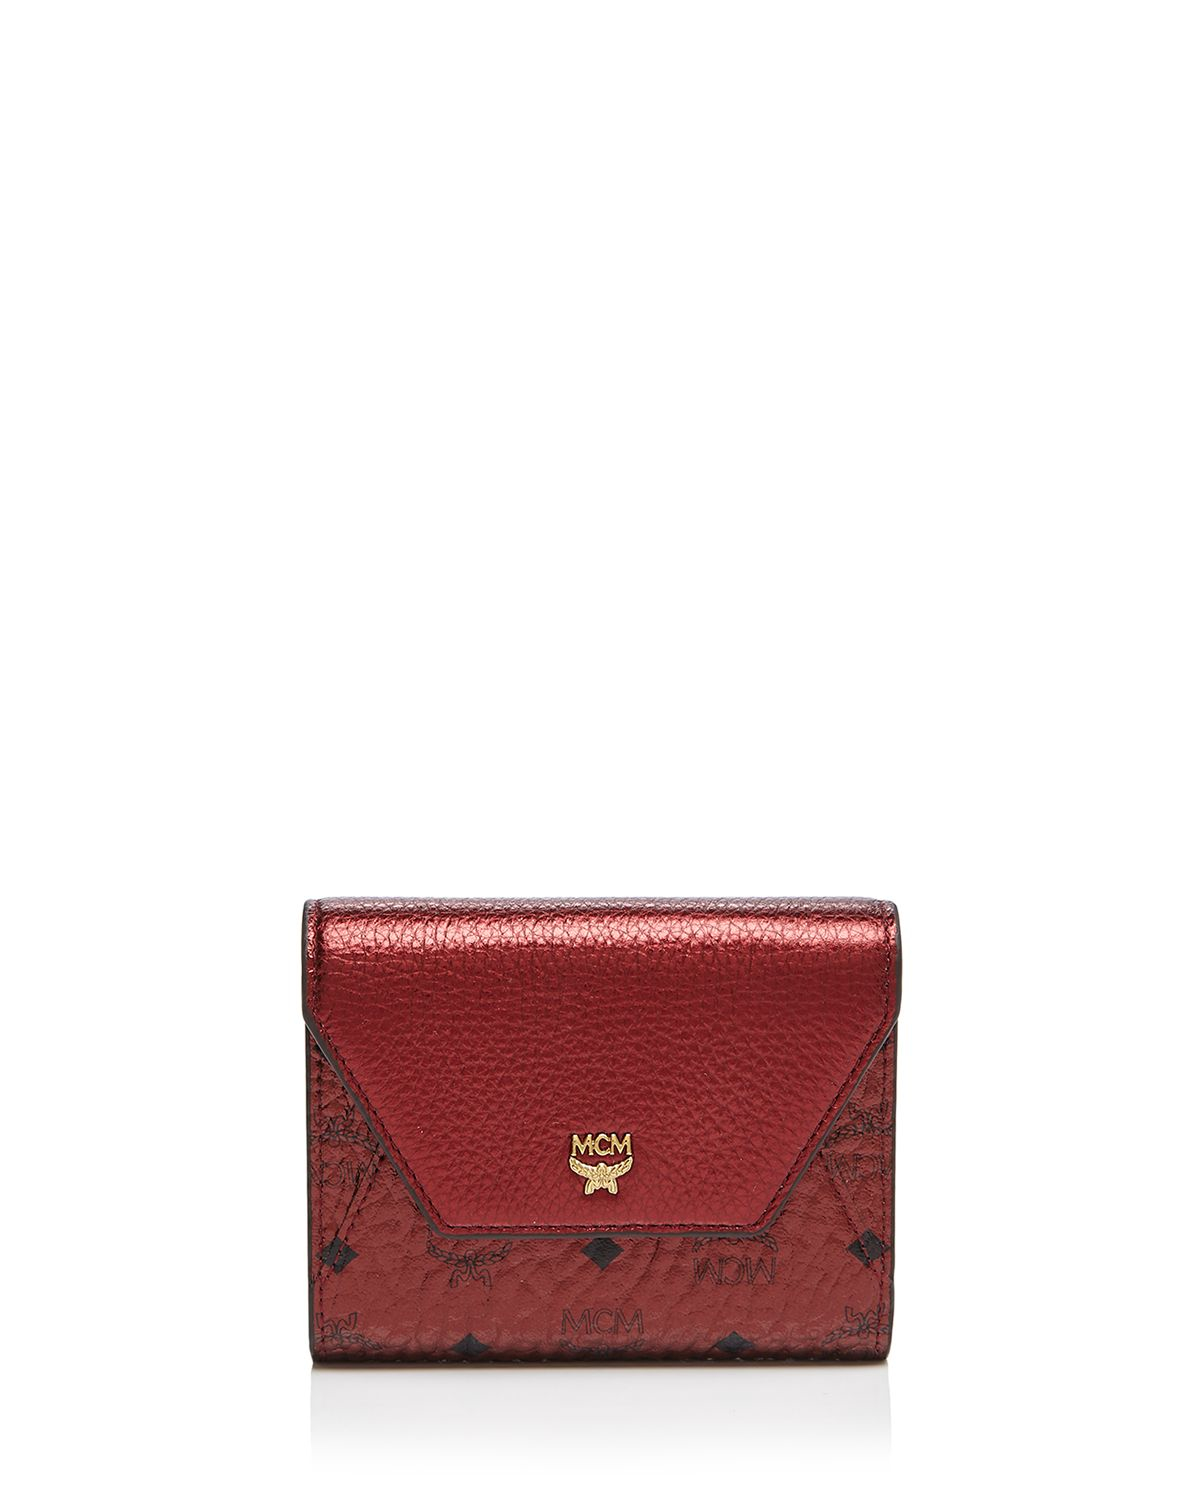 Mcm Love Letter Visetos Tri-Fold Small Wallet in Red (Metallic Scooter ...